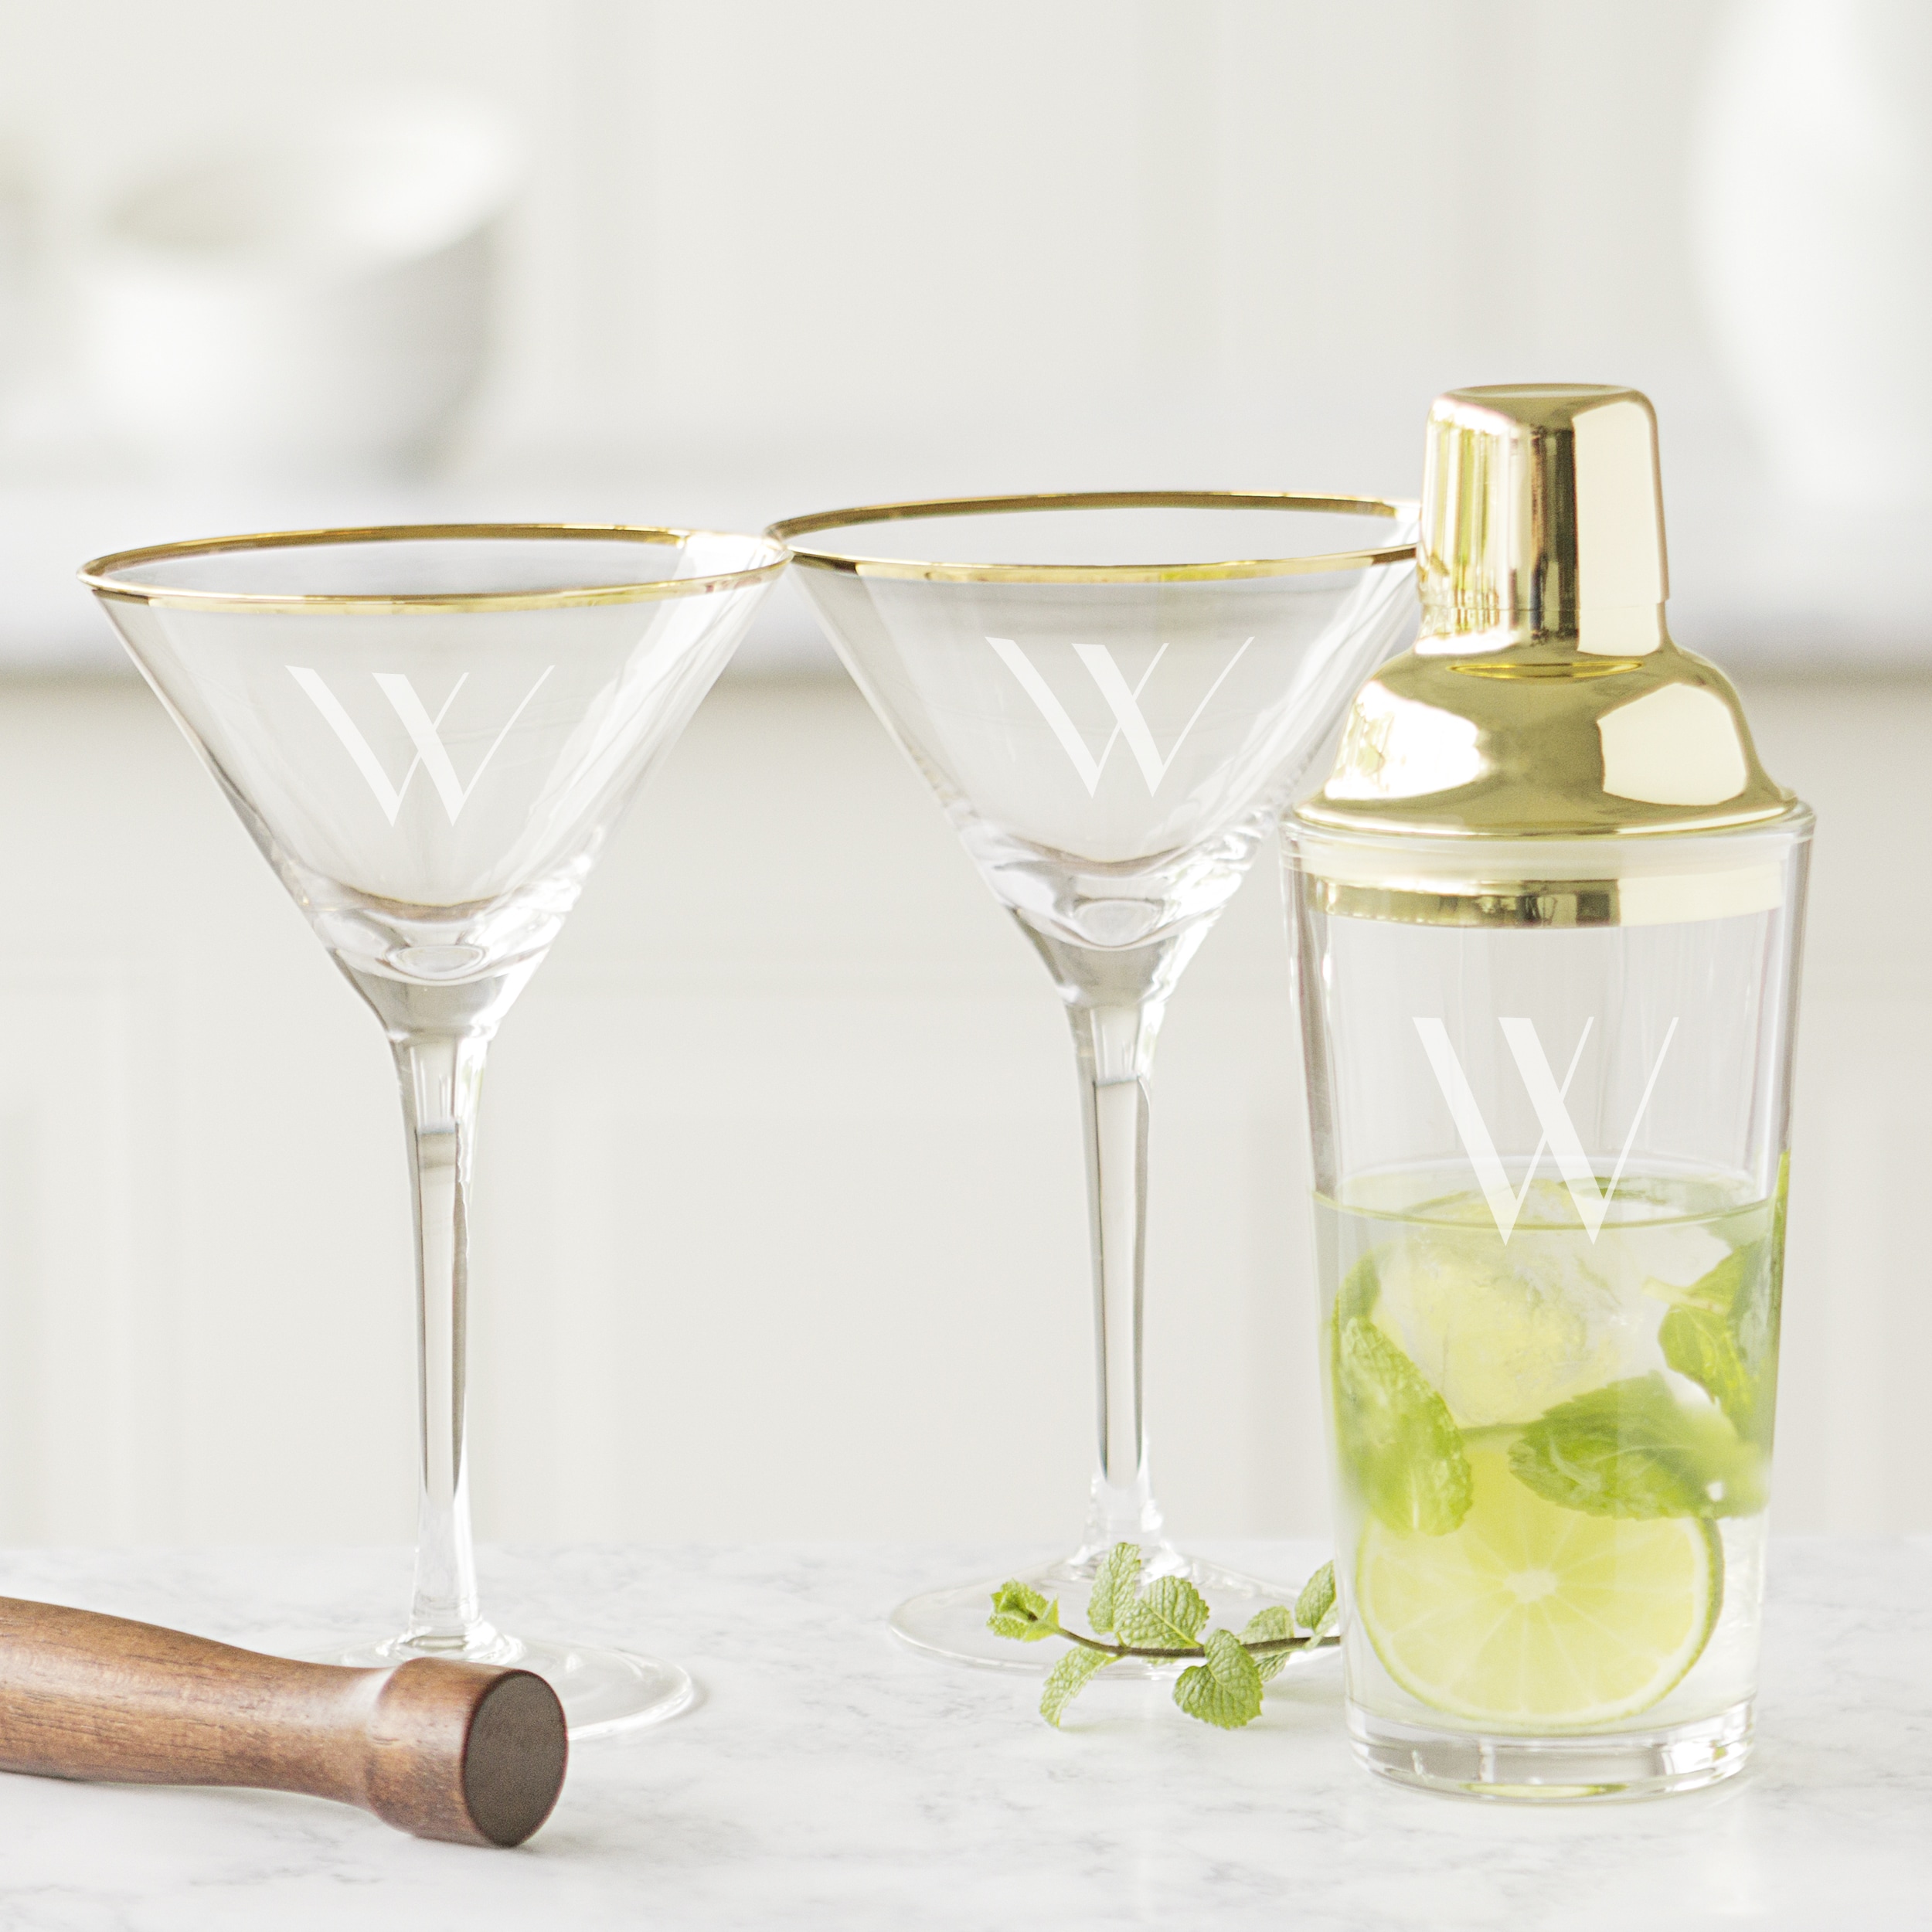 https://ak1.ostkcdn.com/images/products/16807027/Personalized-Gold-Cocktail-Shaker-Set-with-Gold-Rim-Martini-Glasses-aeef9bb9-1ea3-48b3-b4d4-6c2db32a10d6.jpg